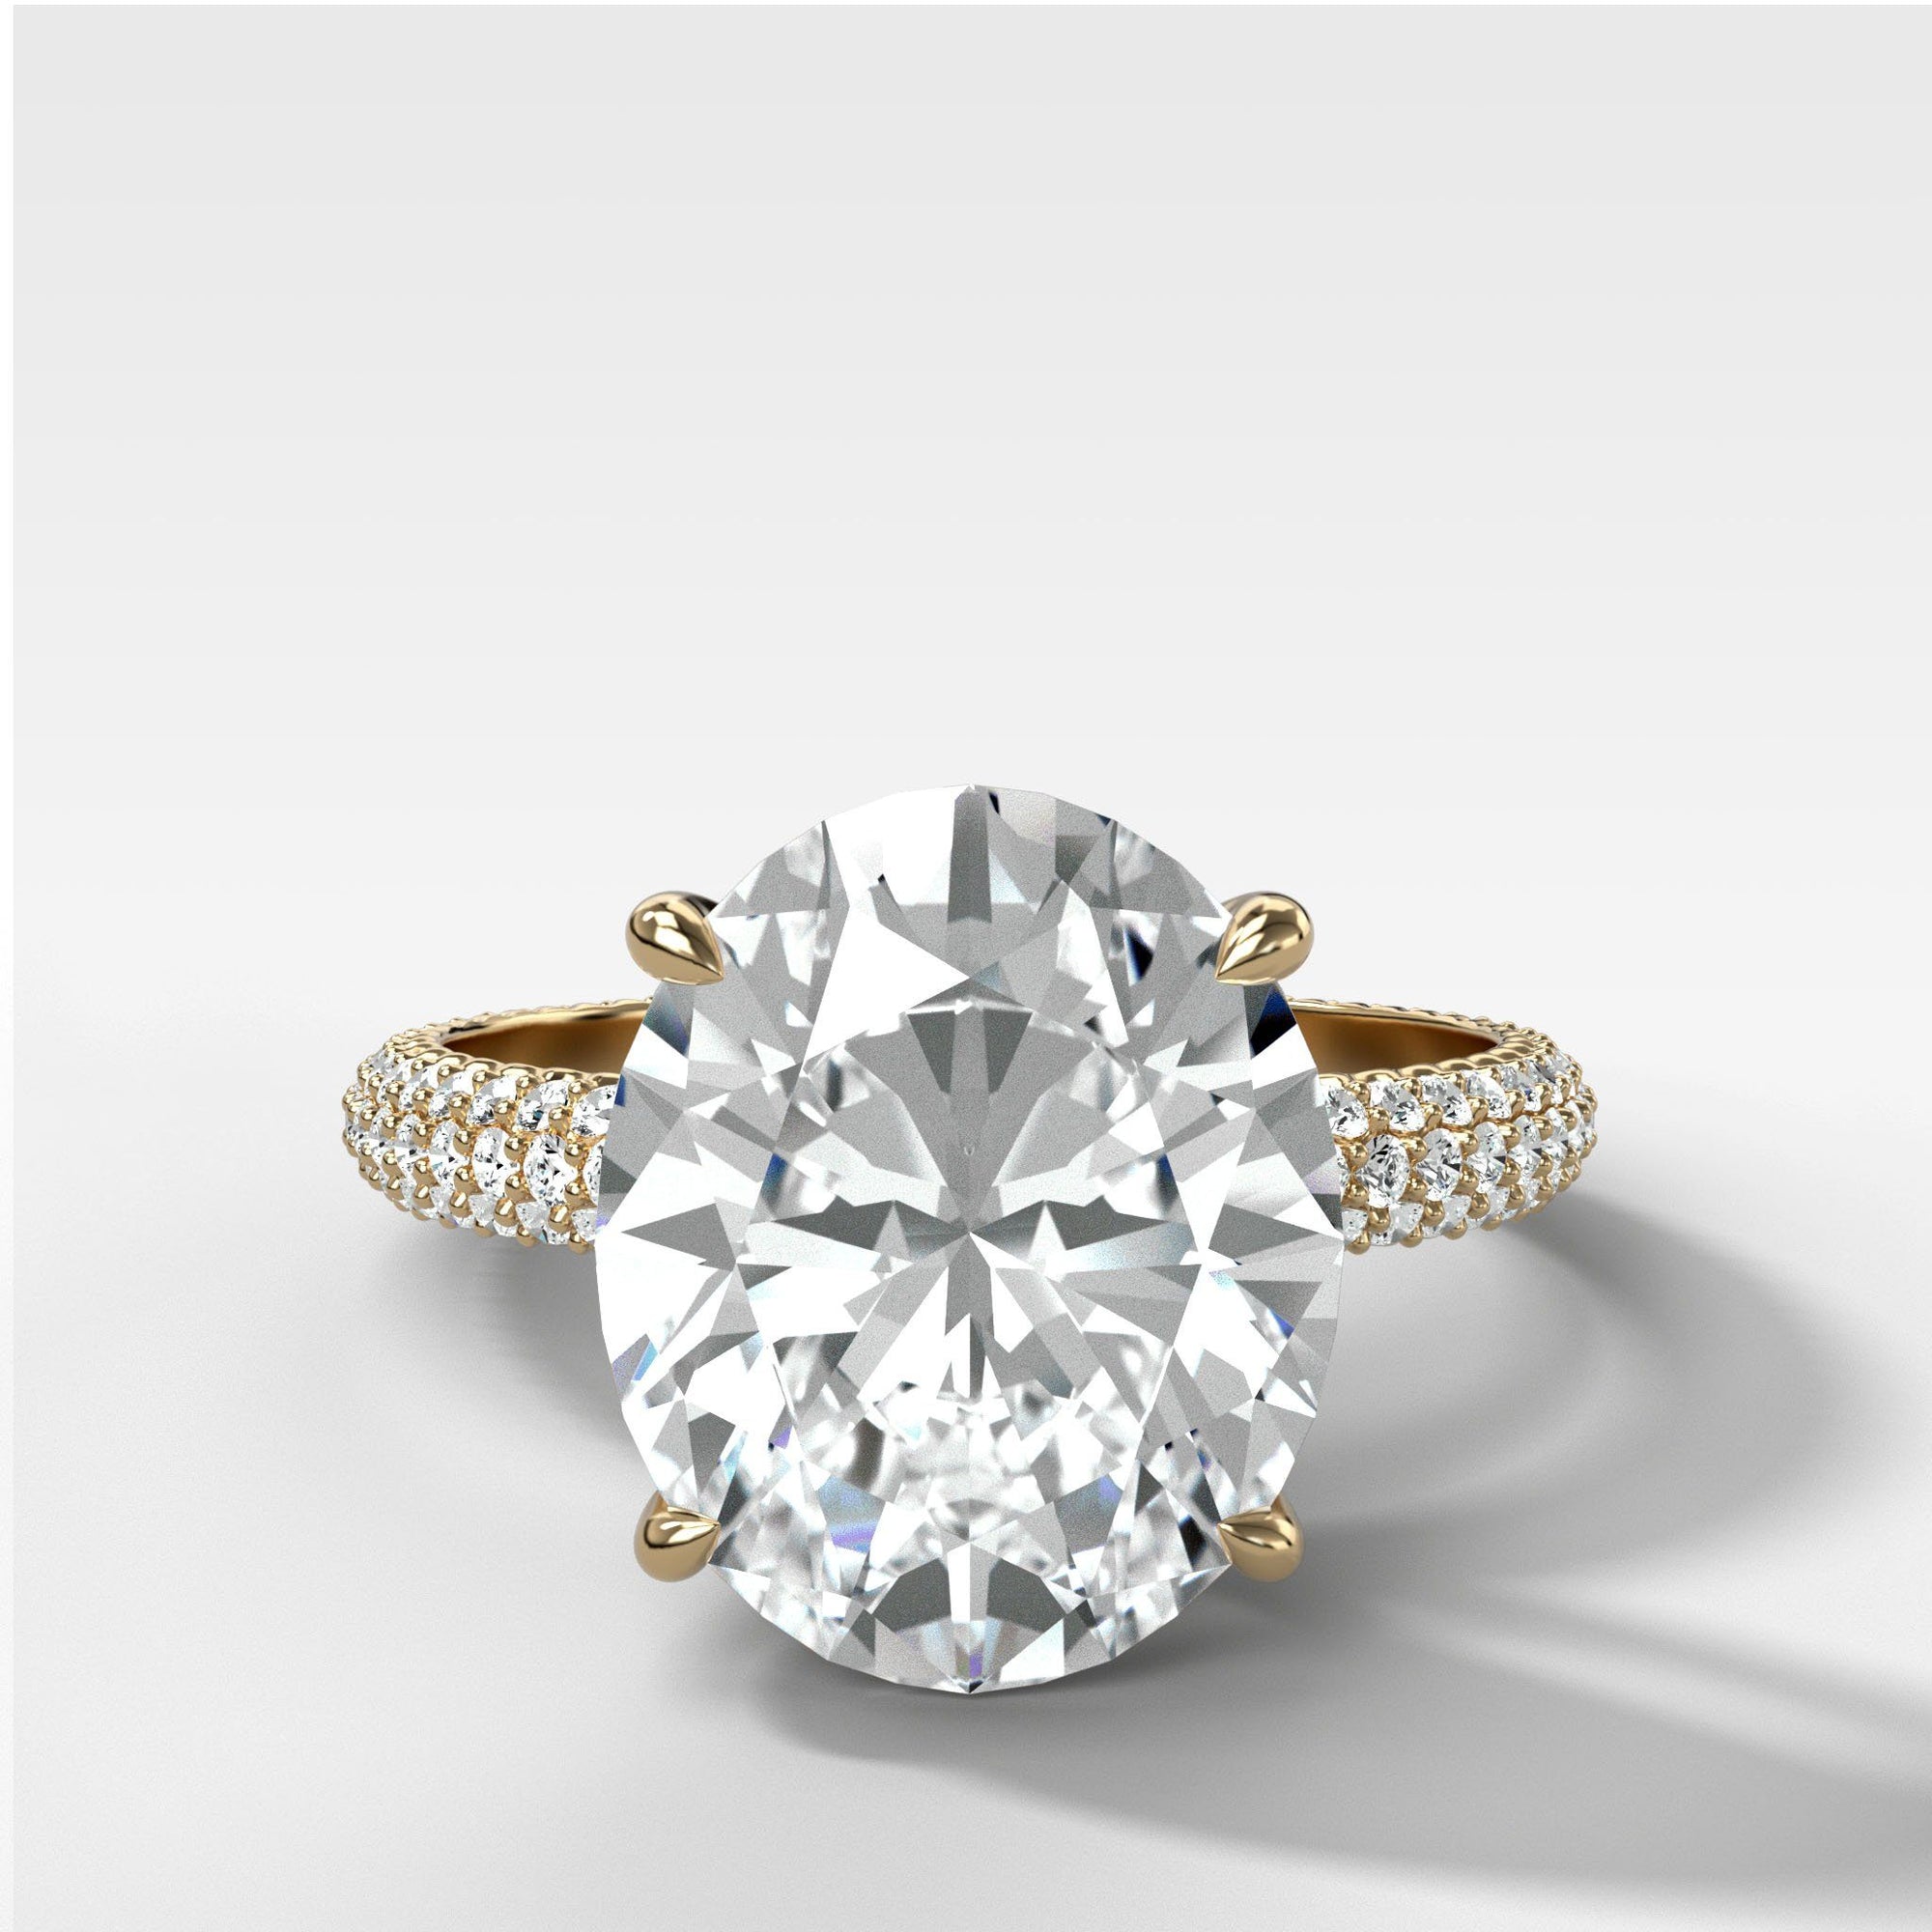 Triple Row Pav≈Ω Engagement Ring With Oval Cut by Good Stone in Yellow Gold